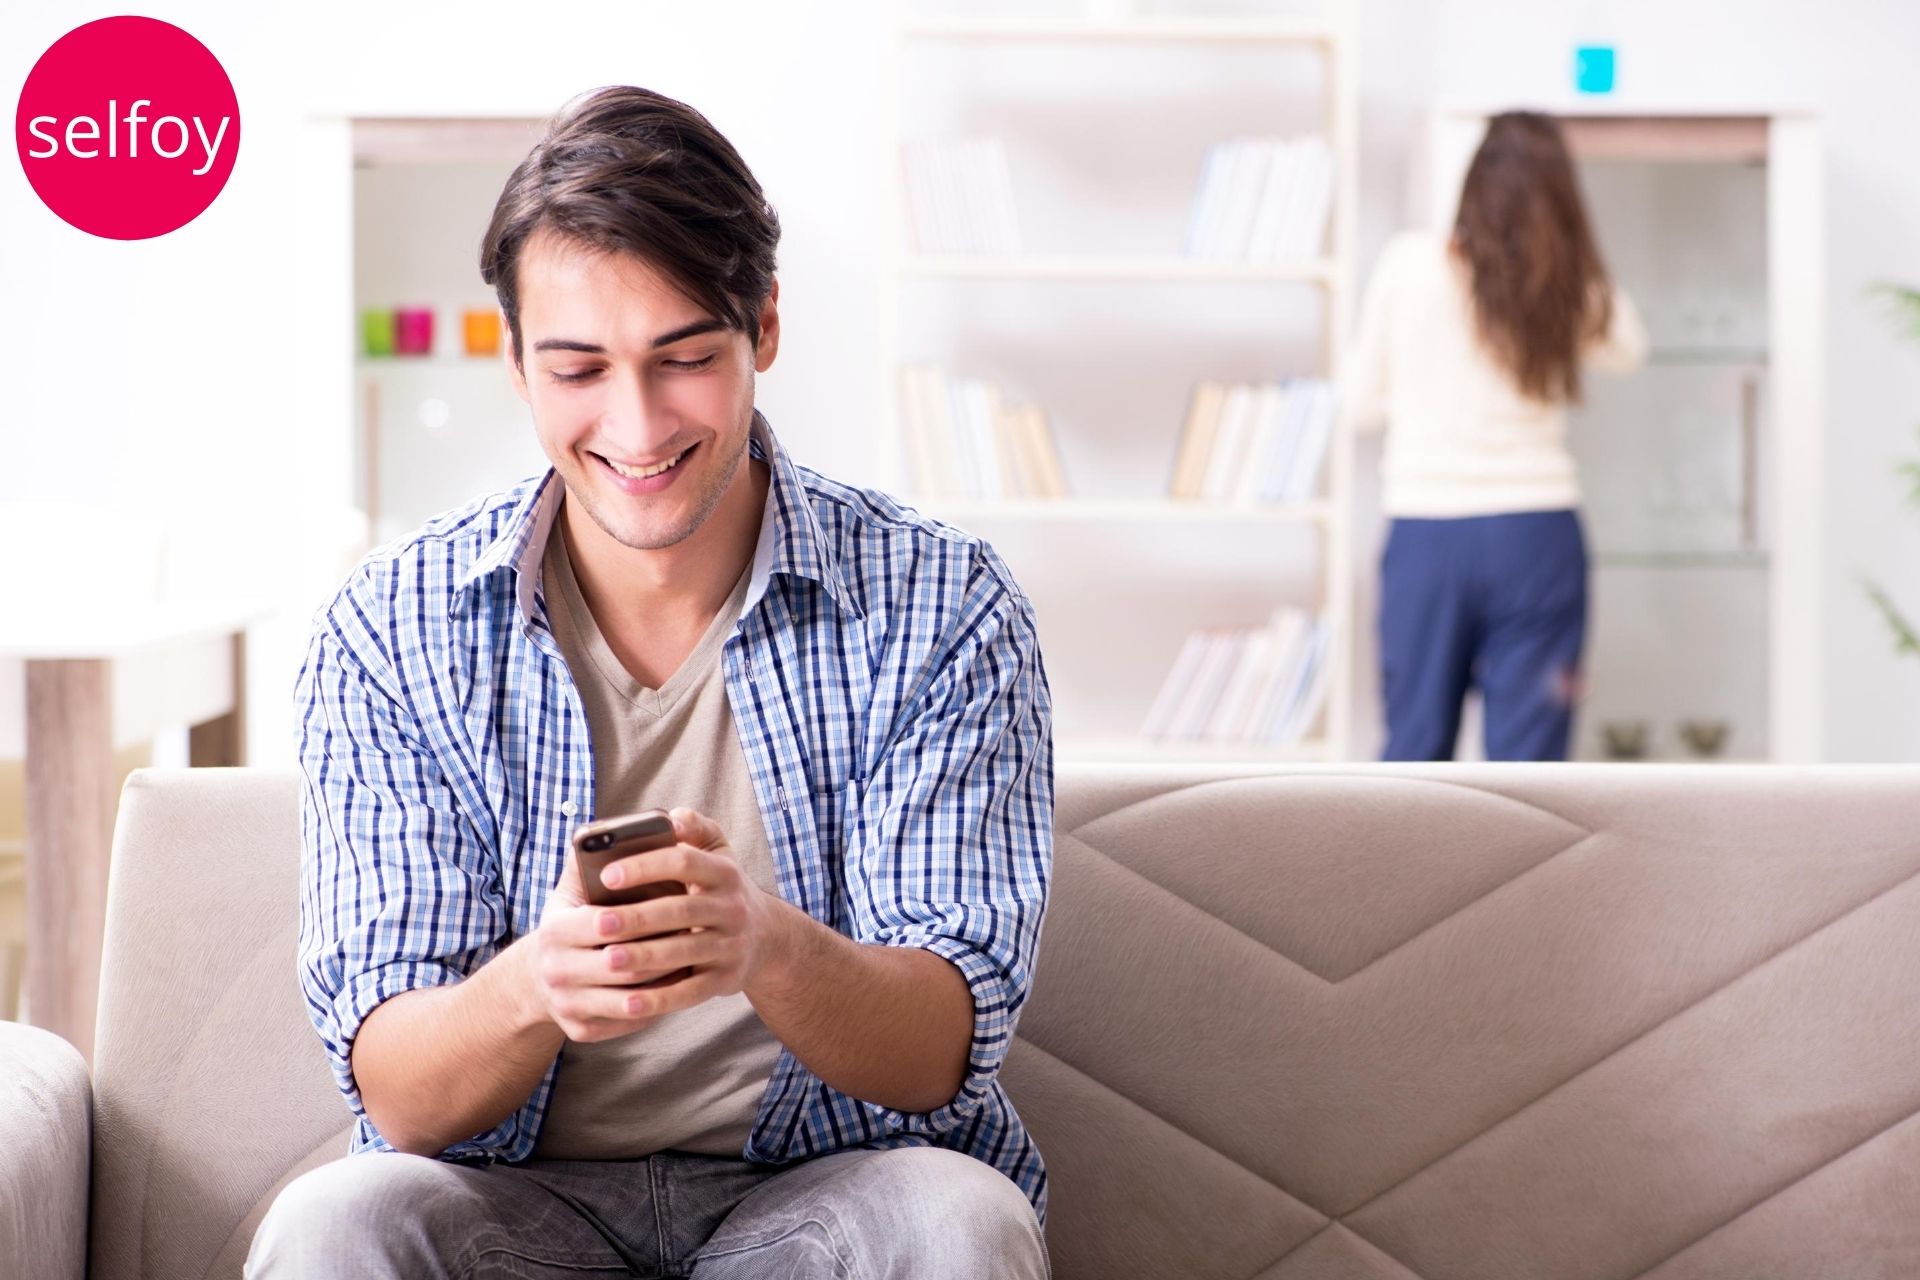 Man is holding mobile and smiling